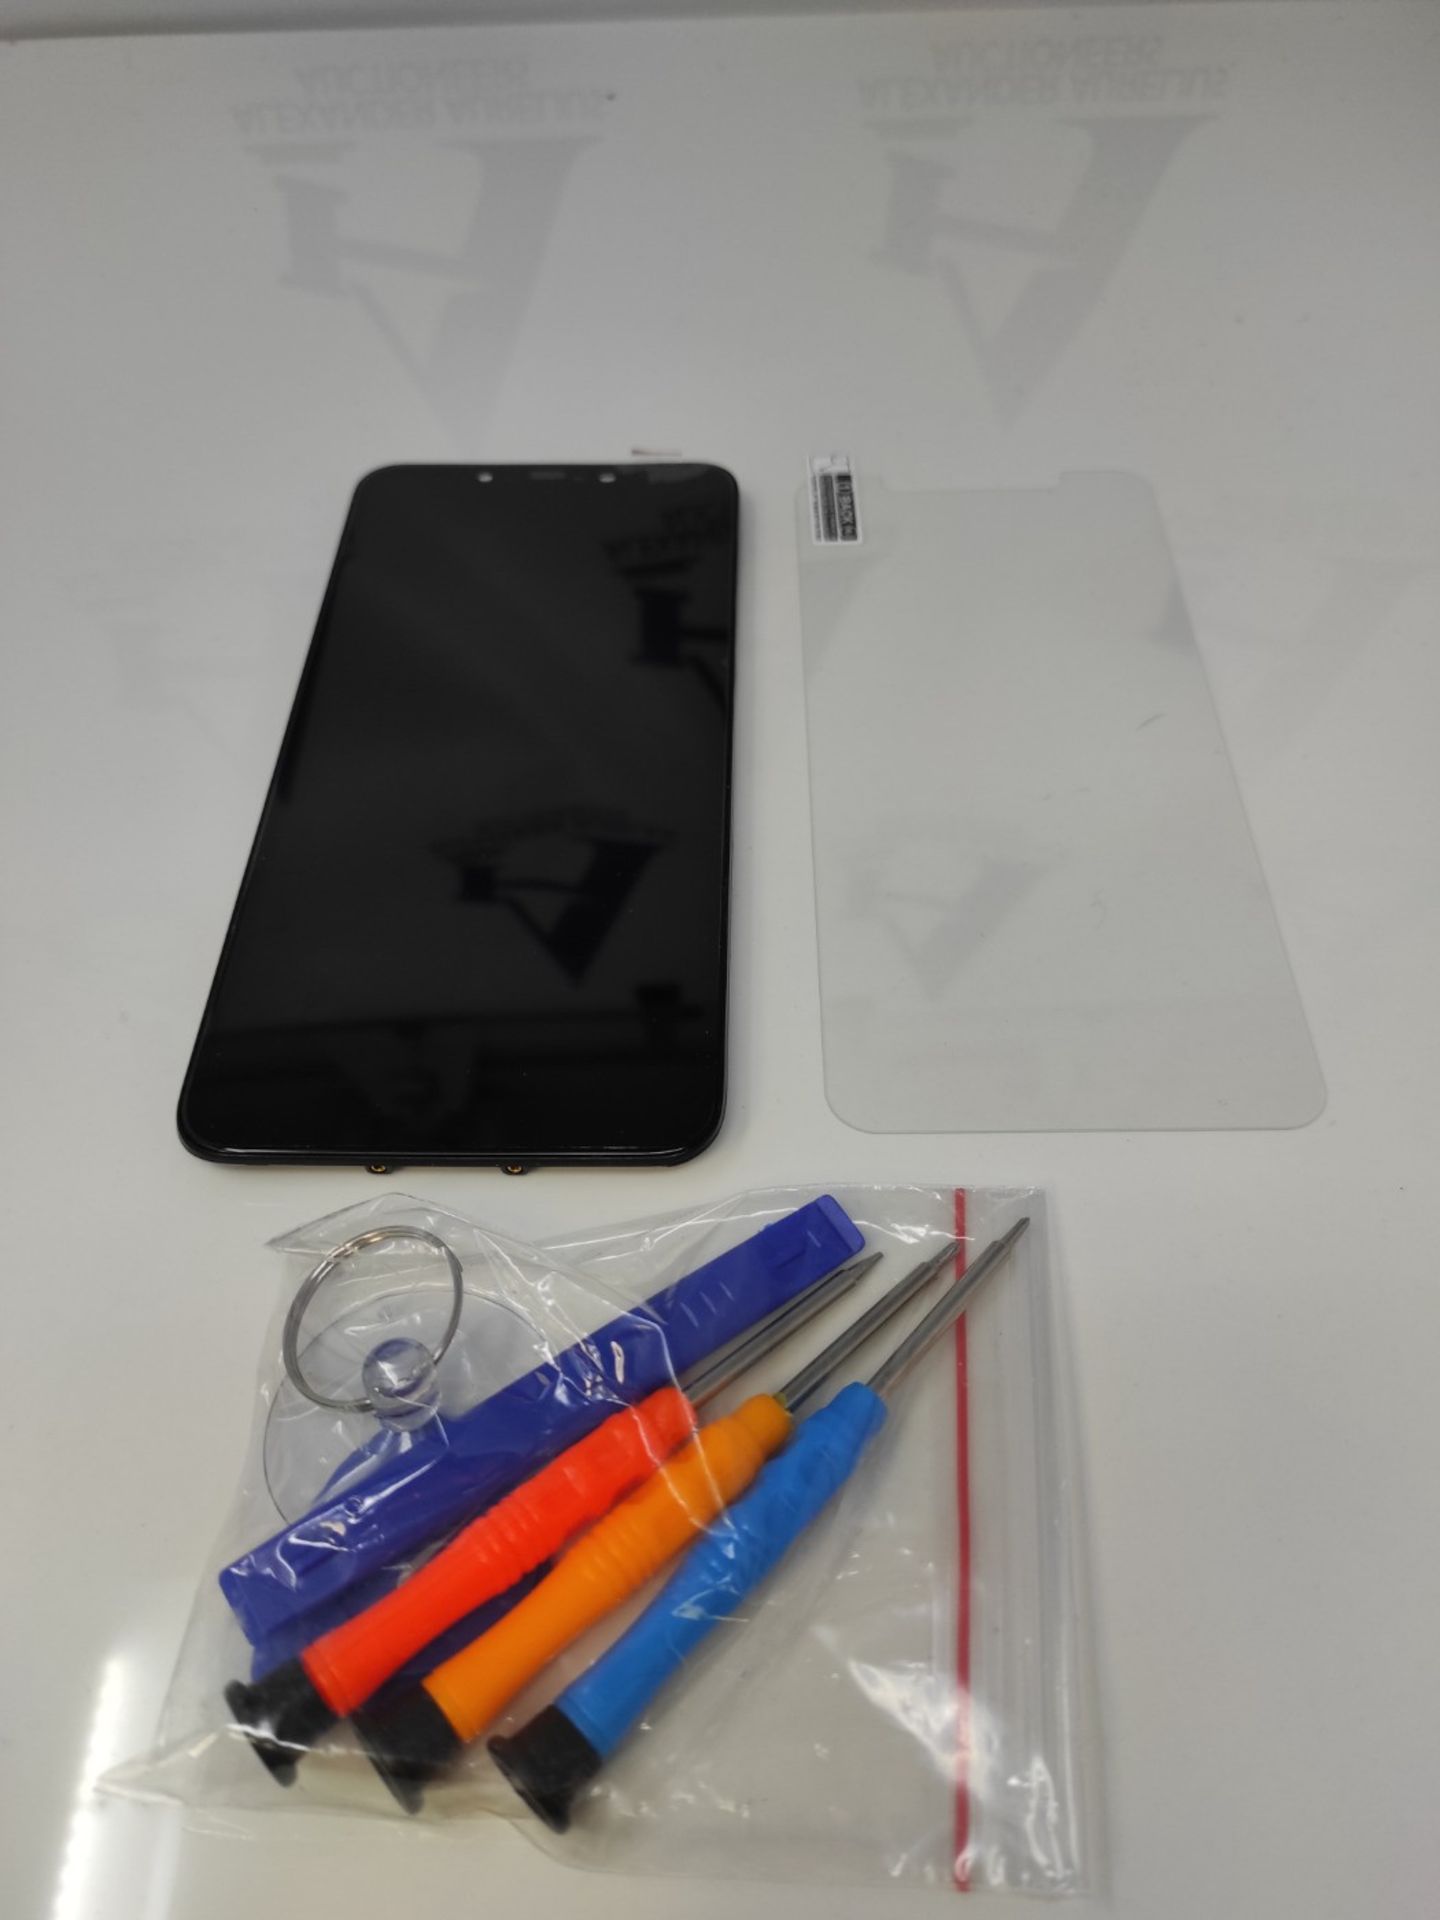 For Xiaomi Pocophone F1 Display For Pocophone F1 LCD For Pocophone F1 Screen Replaceme - Image 2 of 2